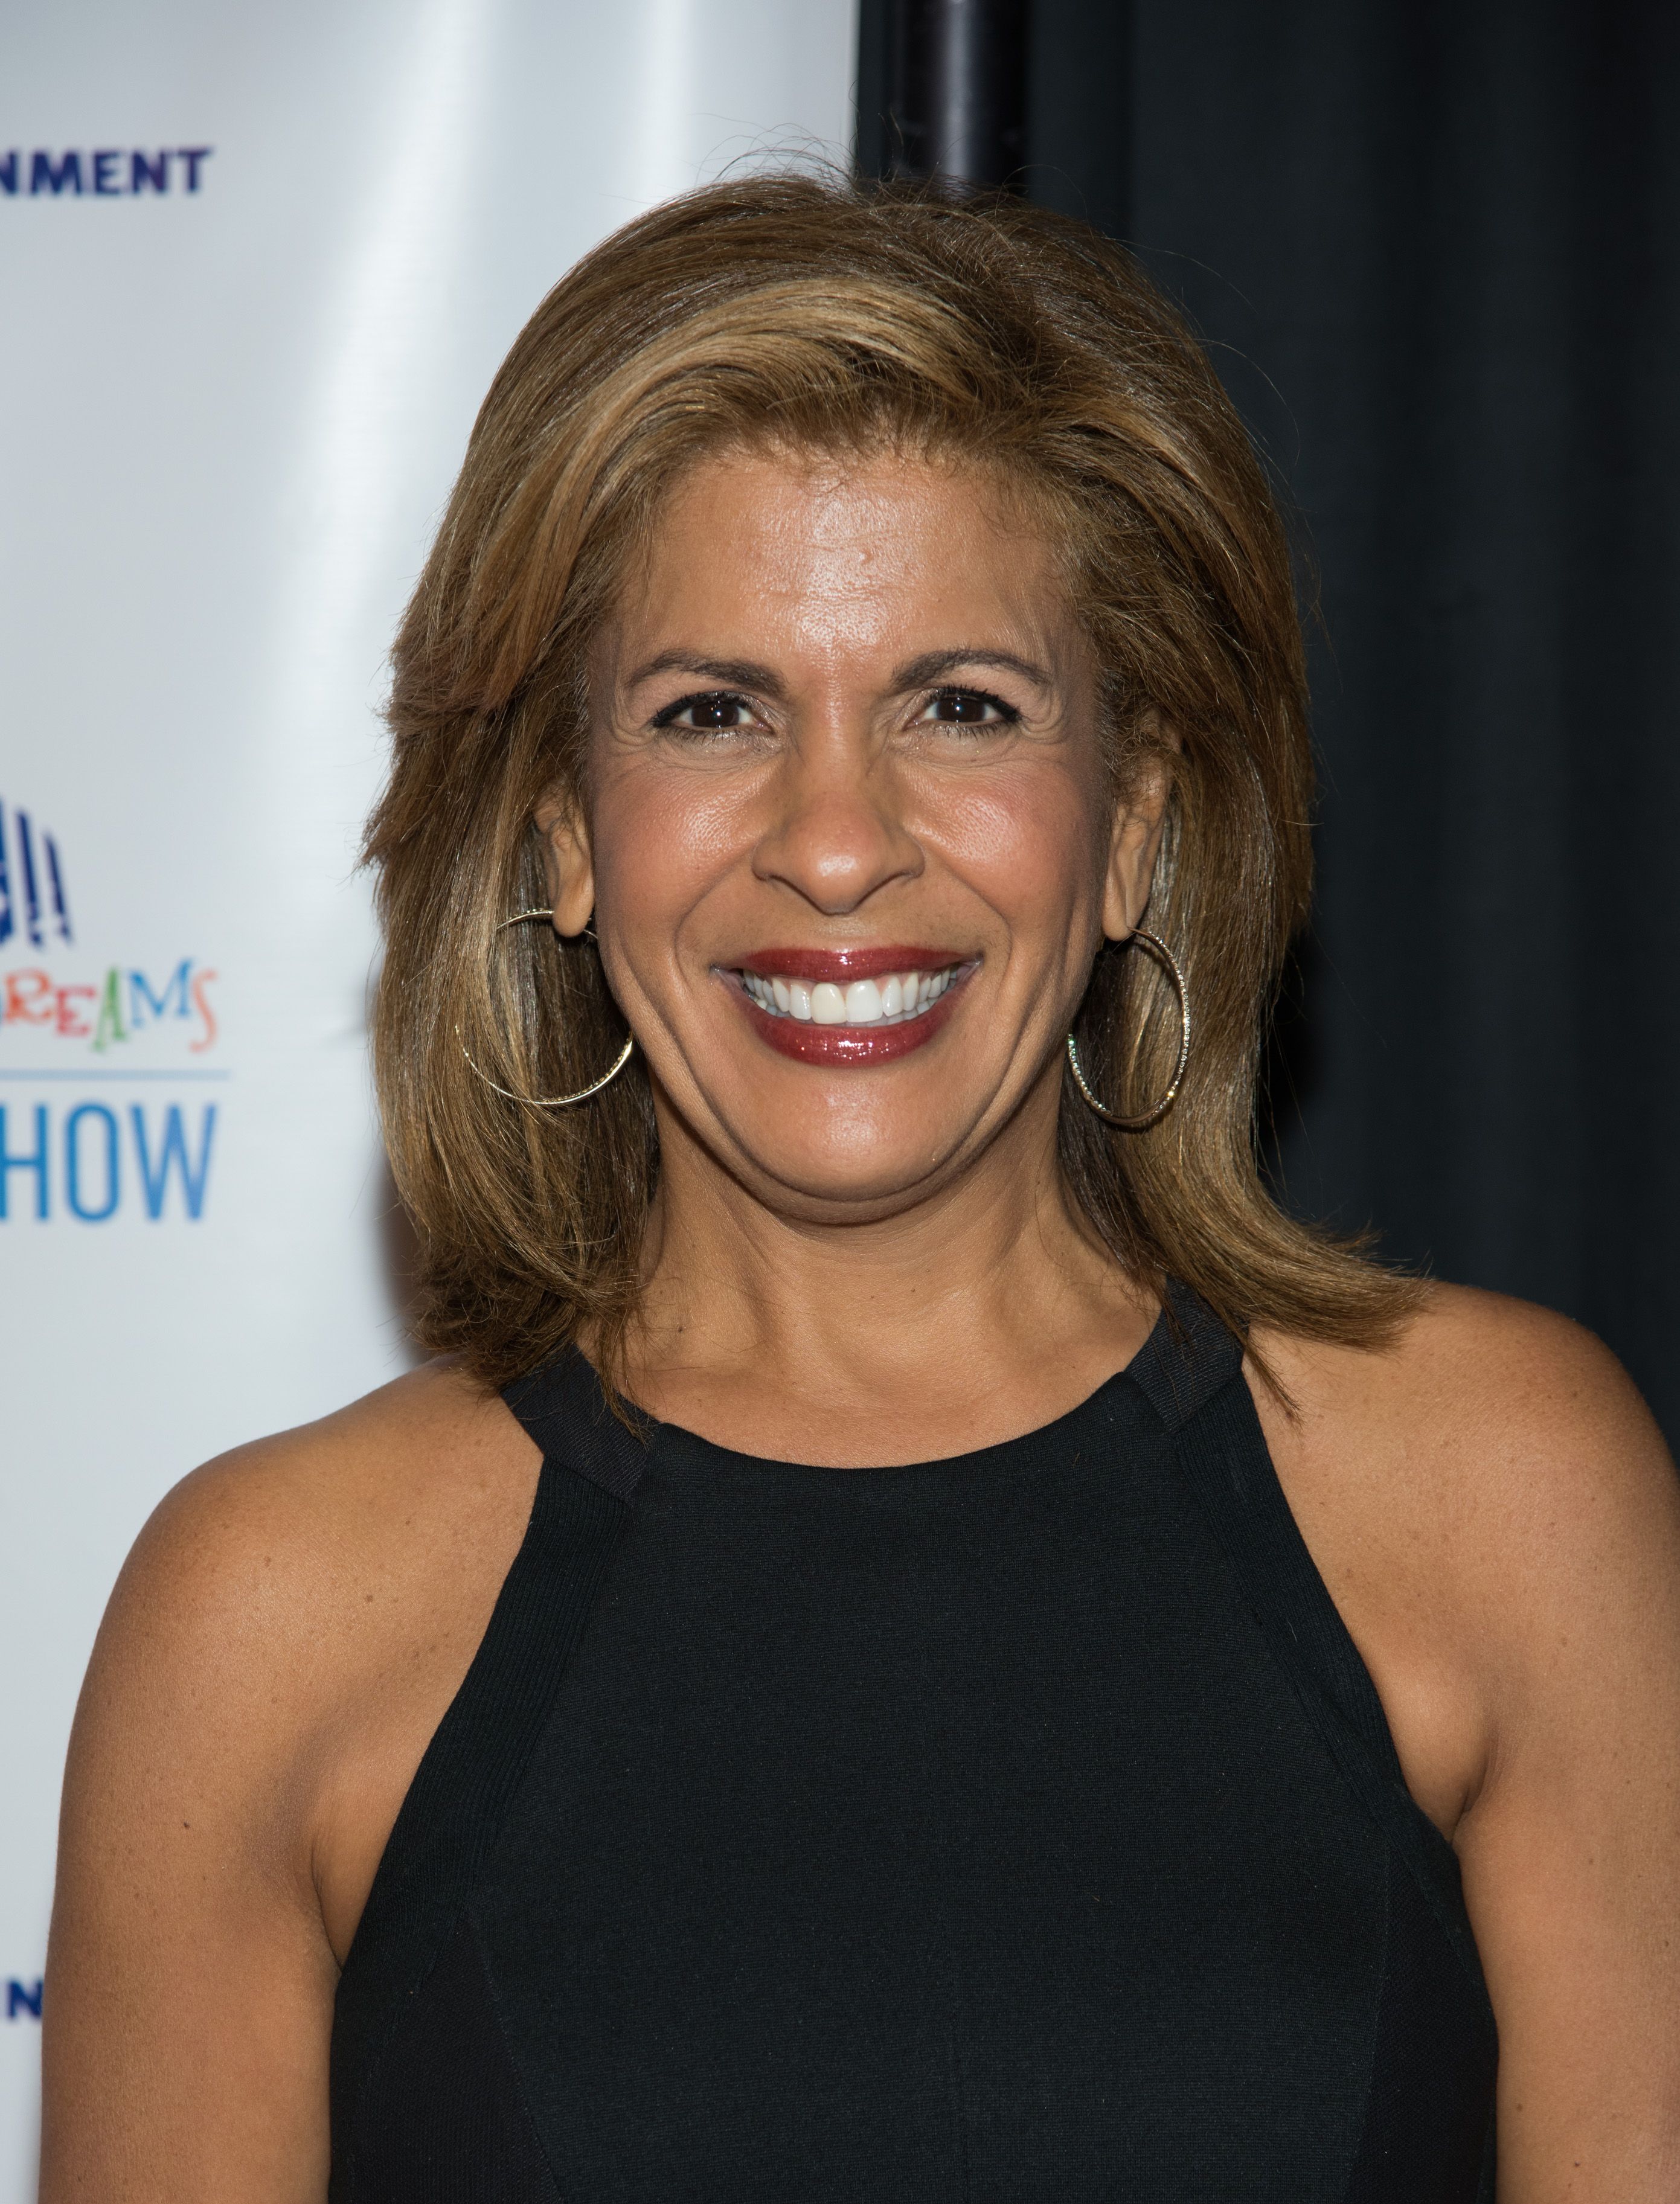 Hoda Kotb at the Garden of Dreams Foundation Children Talent Show at Radio City Music Hall on June 18, 2015, in New York City | Photo: Dave Kotinsky/Getty Images